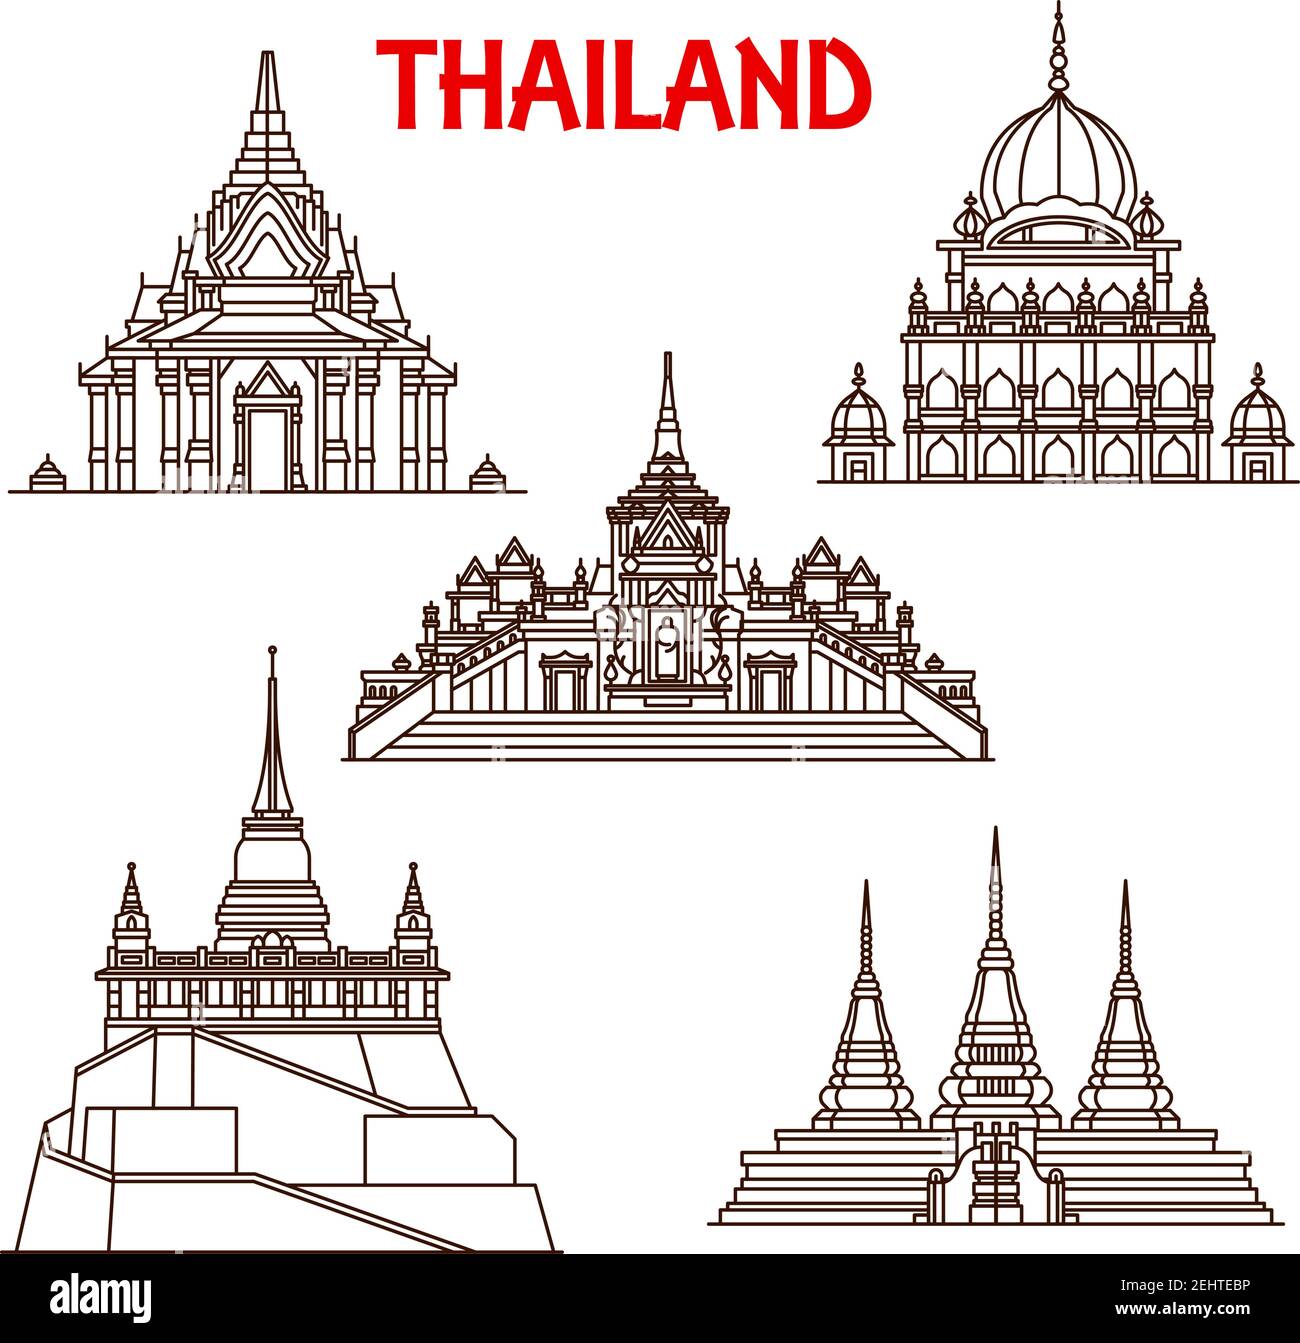 Thailand Buddhist temples architecture vector landmark icons. Thin line facades of Golden Buddha Wat Traimit, Saket Mount or Pho and Sikh temple or La Stock Vector